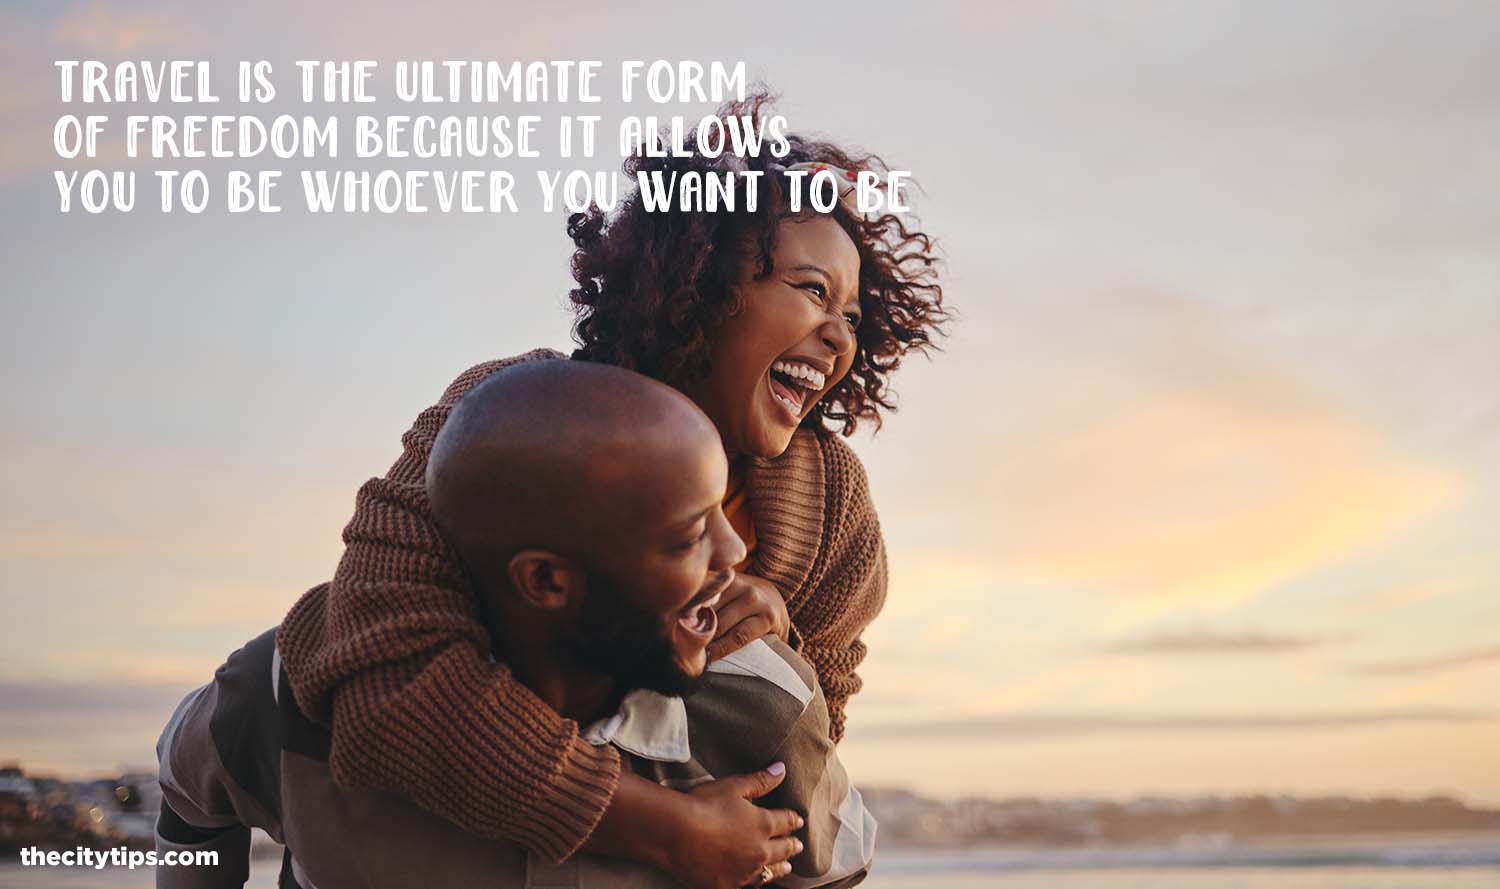 "Travel is the ultimate form of freedom because it allows you to be whoever you want to be."